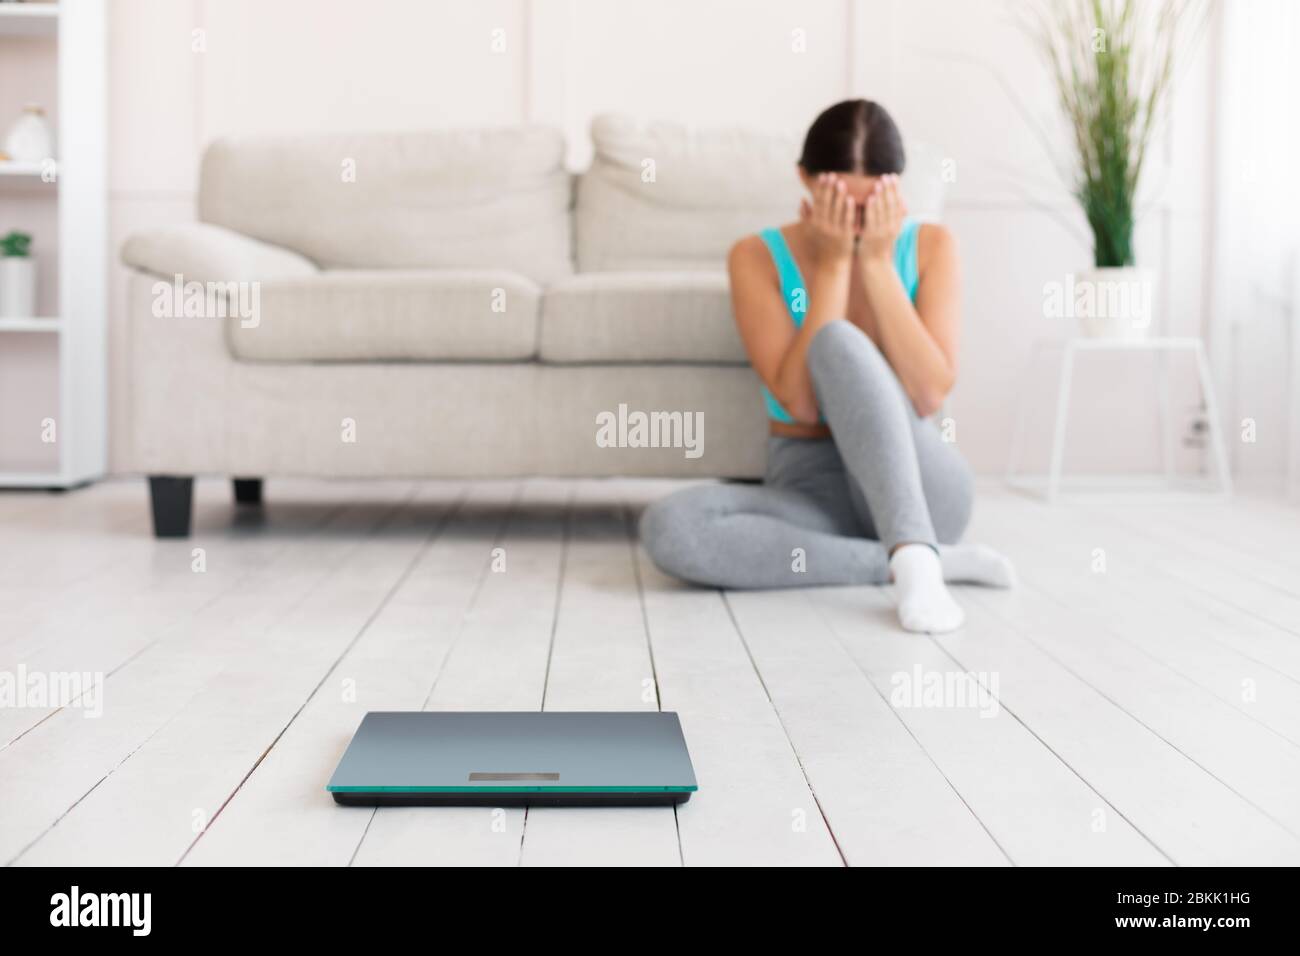 Woman Crying Sitting Near Weight Scales Gaining Kilograms At Home Stock Photo